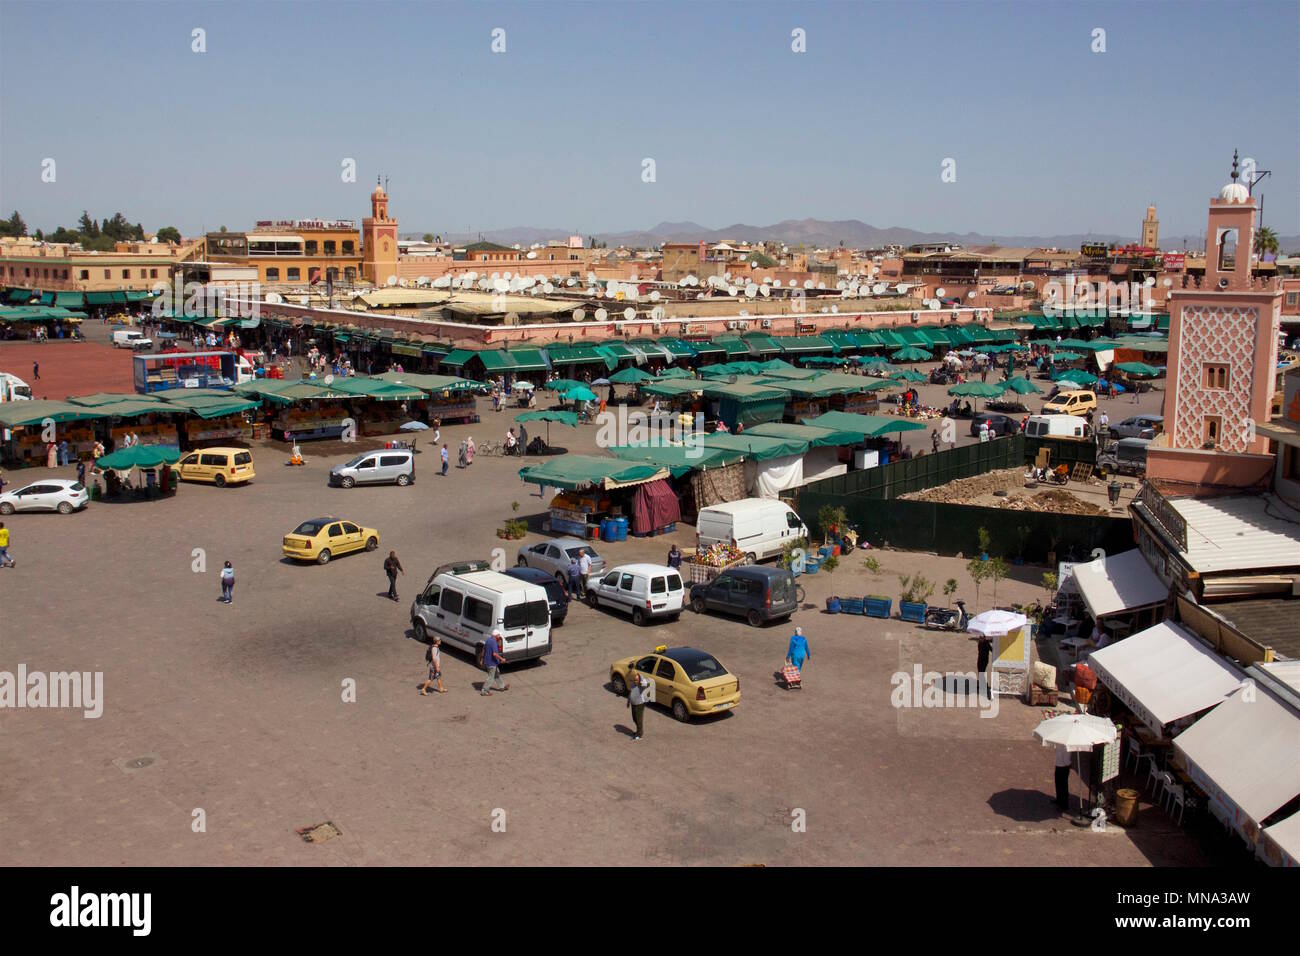 An aerial view of Jemaa el-Fnaa, the main square of Marrakesh and market place in Marrakesh's medina quarter, used by locals and tourists. Stock Photo